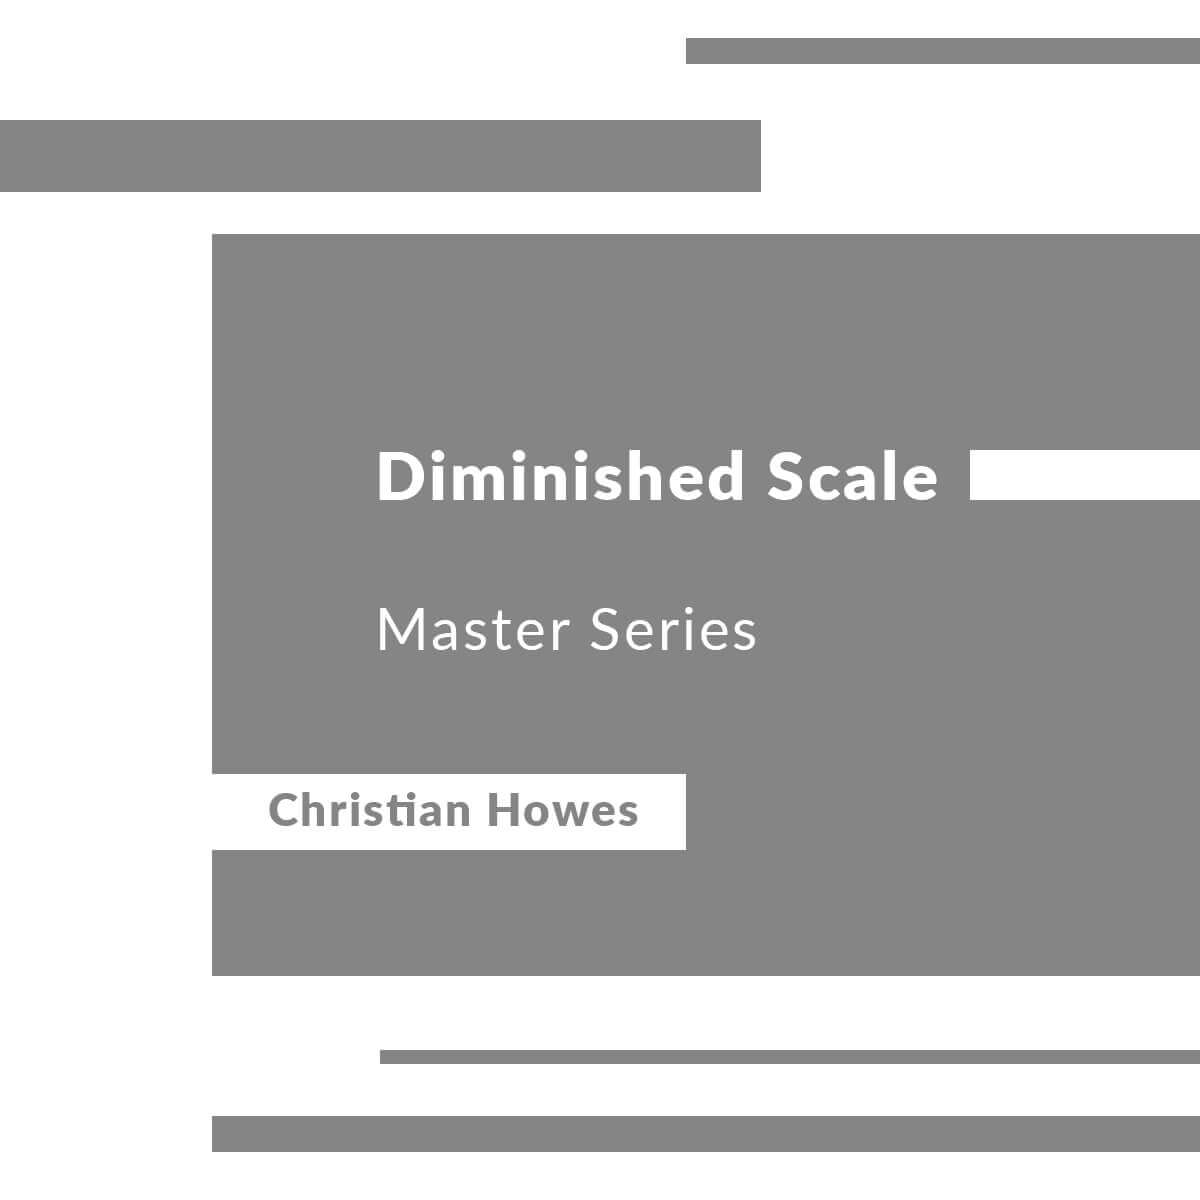 Diminished Scale Master Series (Video Series +Additional Materials)